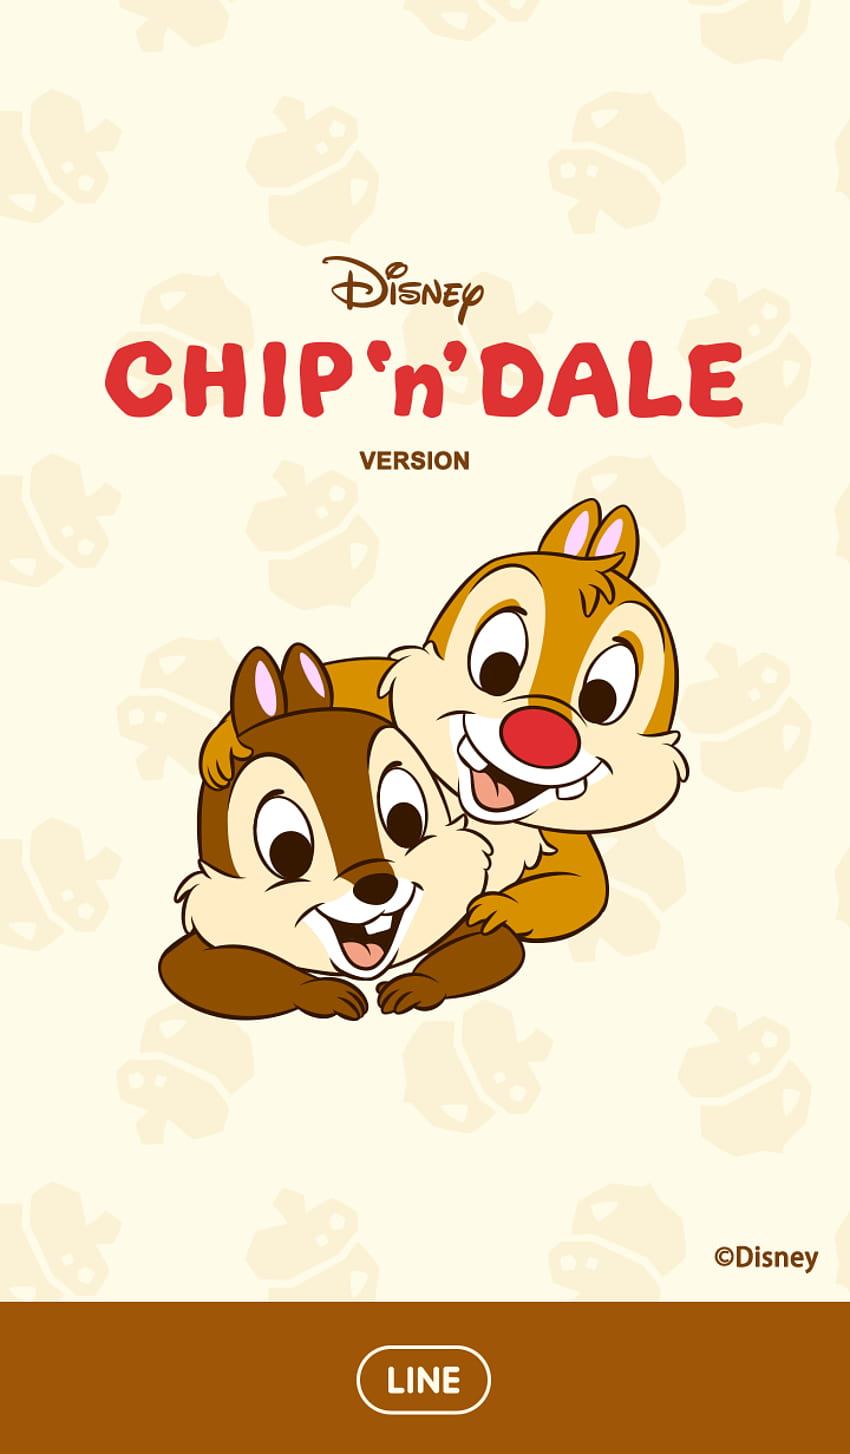 about Disney（Chip & Dale HD phone wallpaper